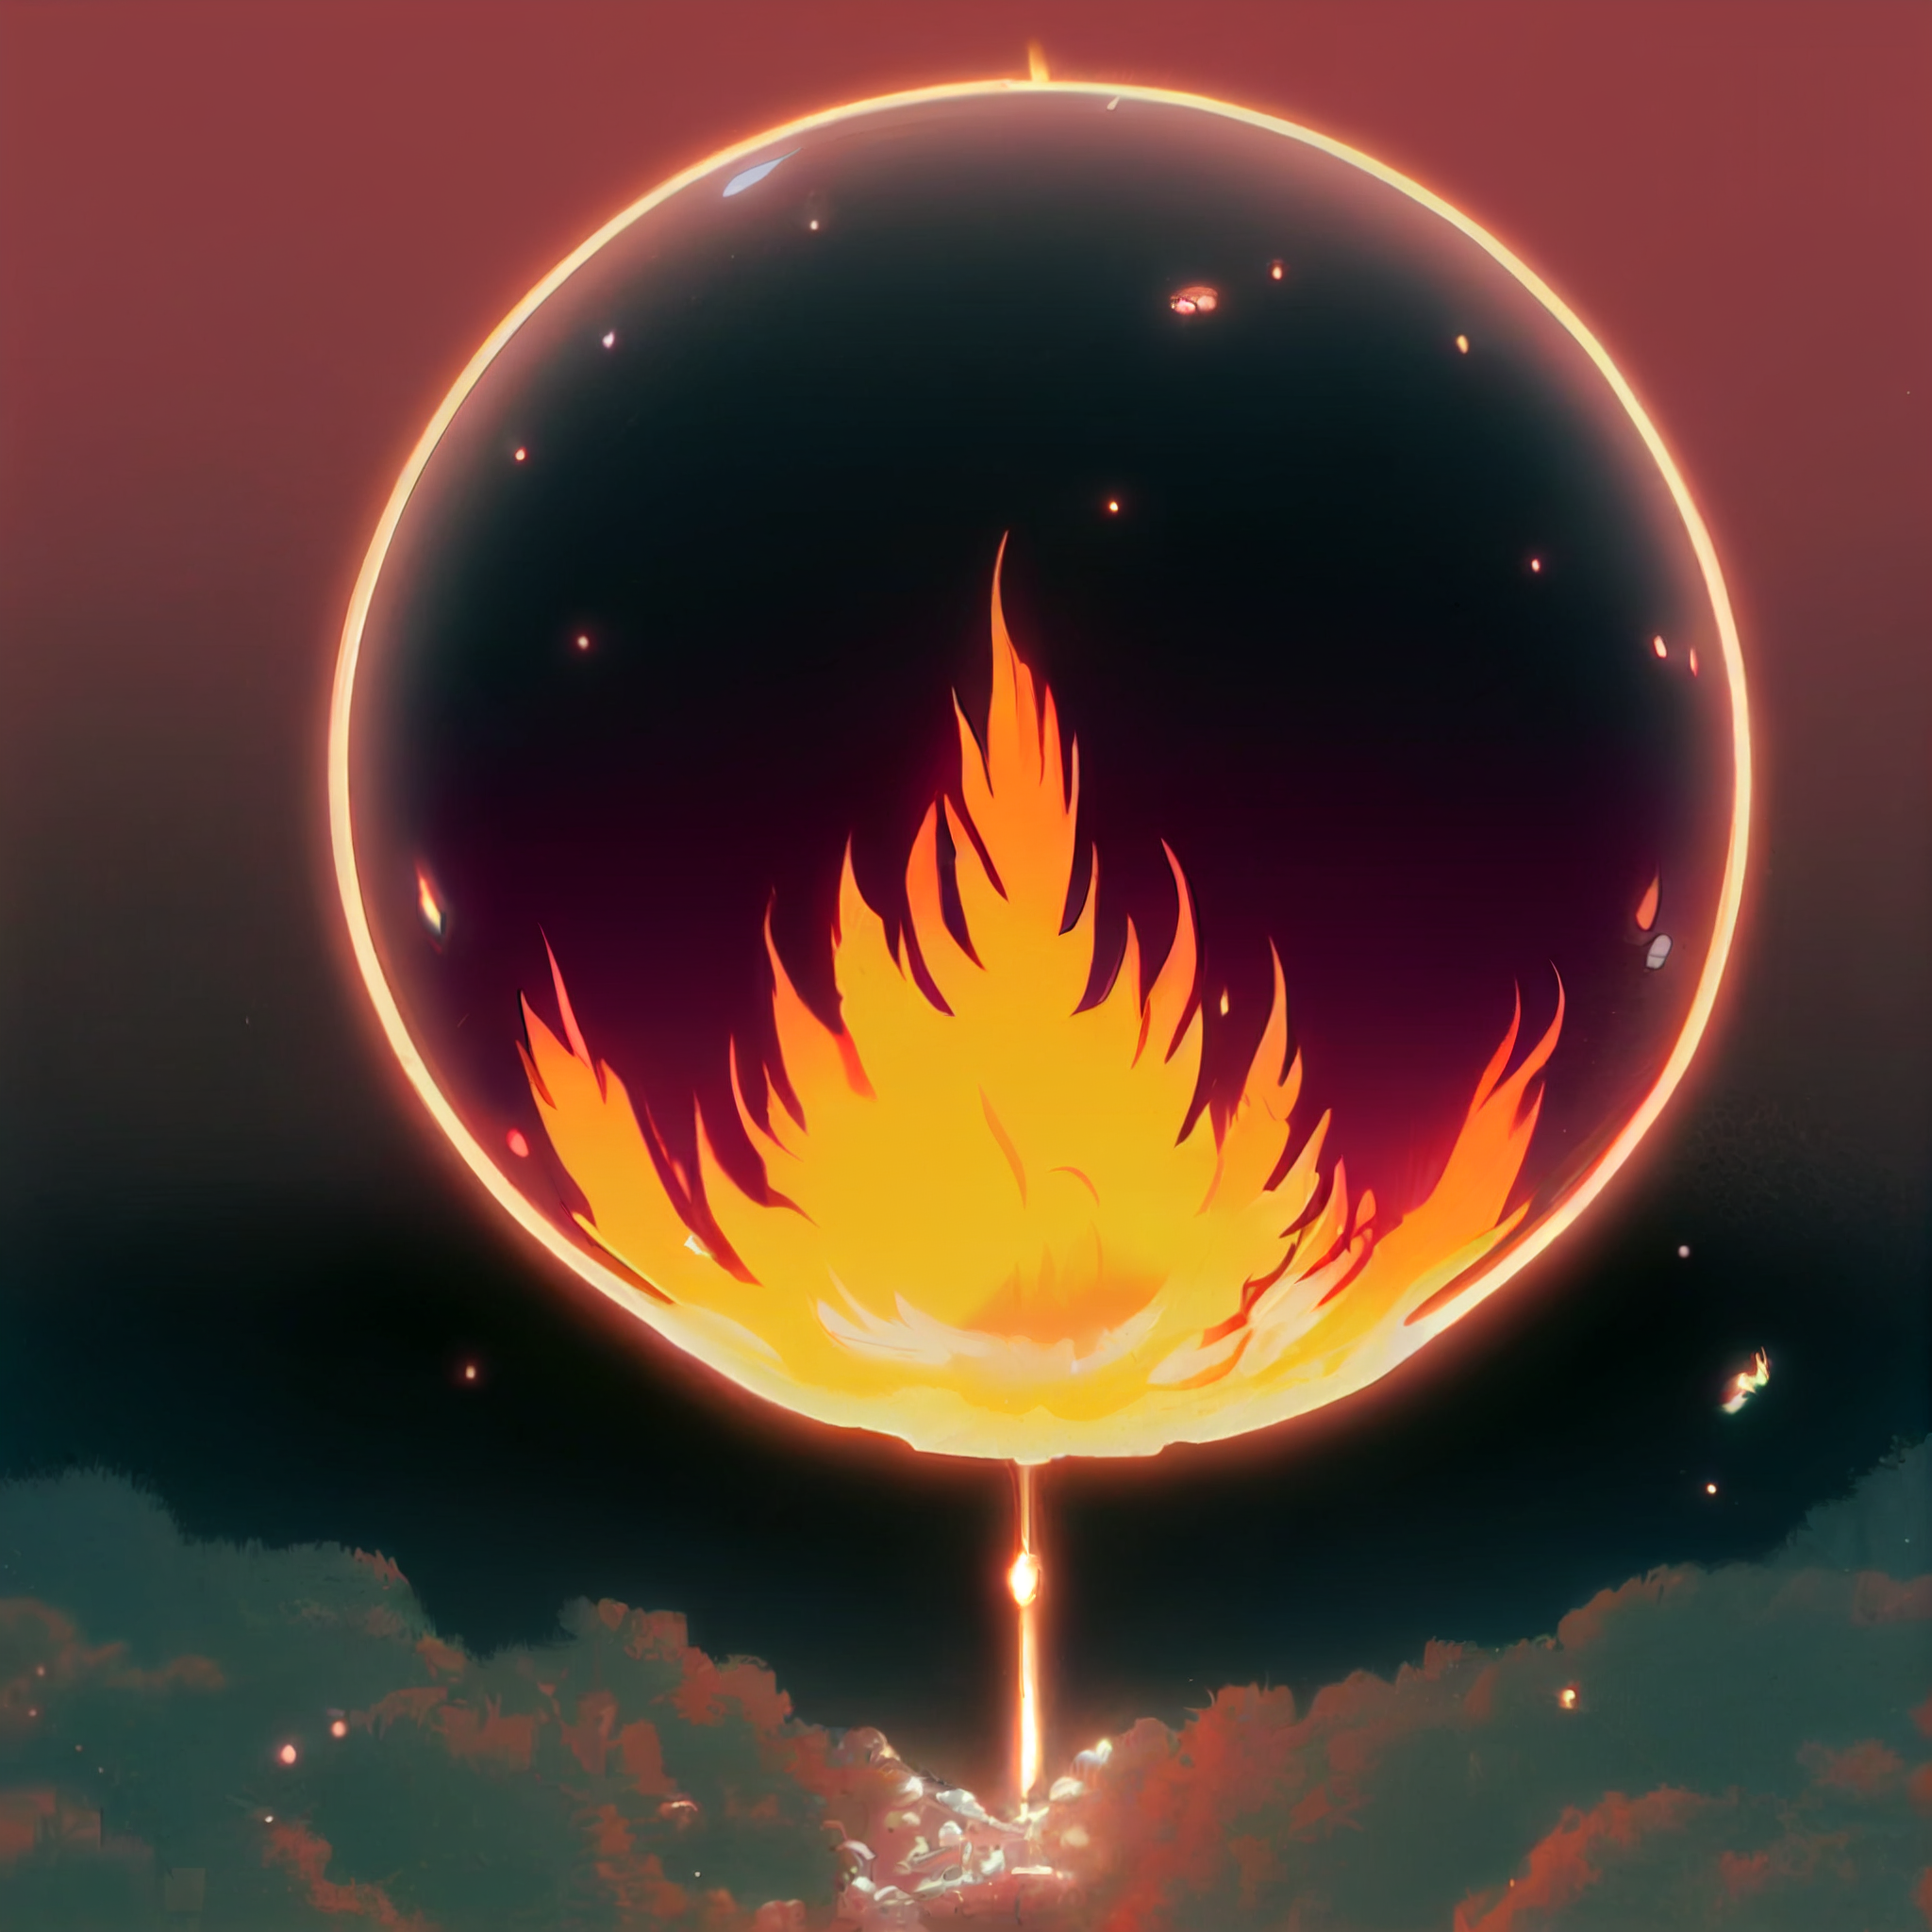 prompthunt: fire ball in 90's anime detailed style